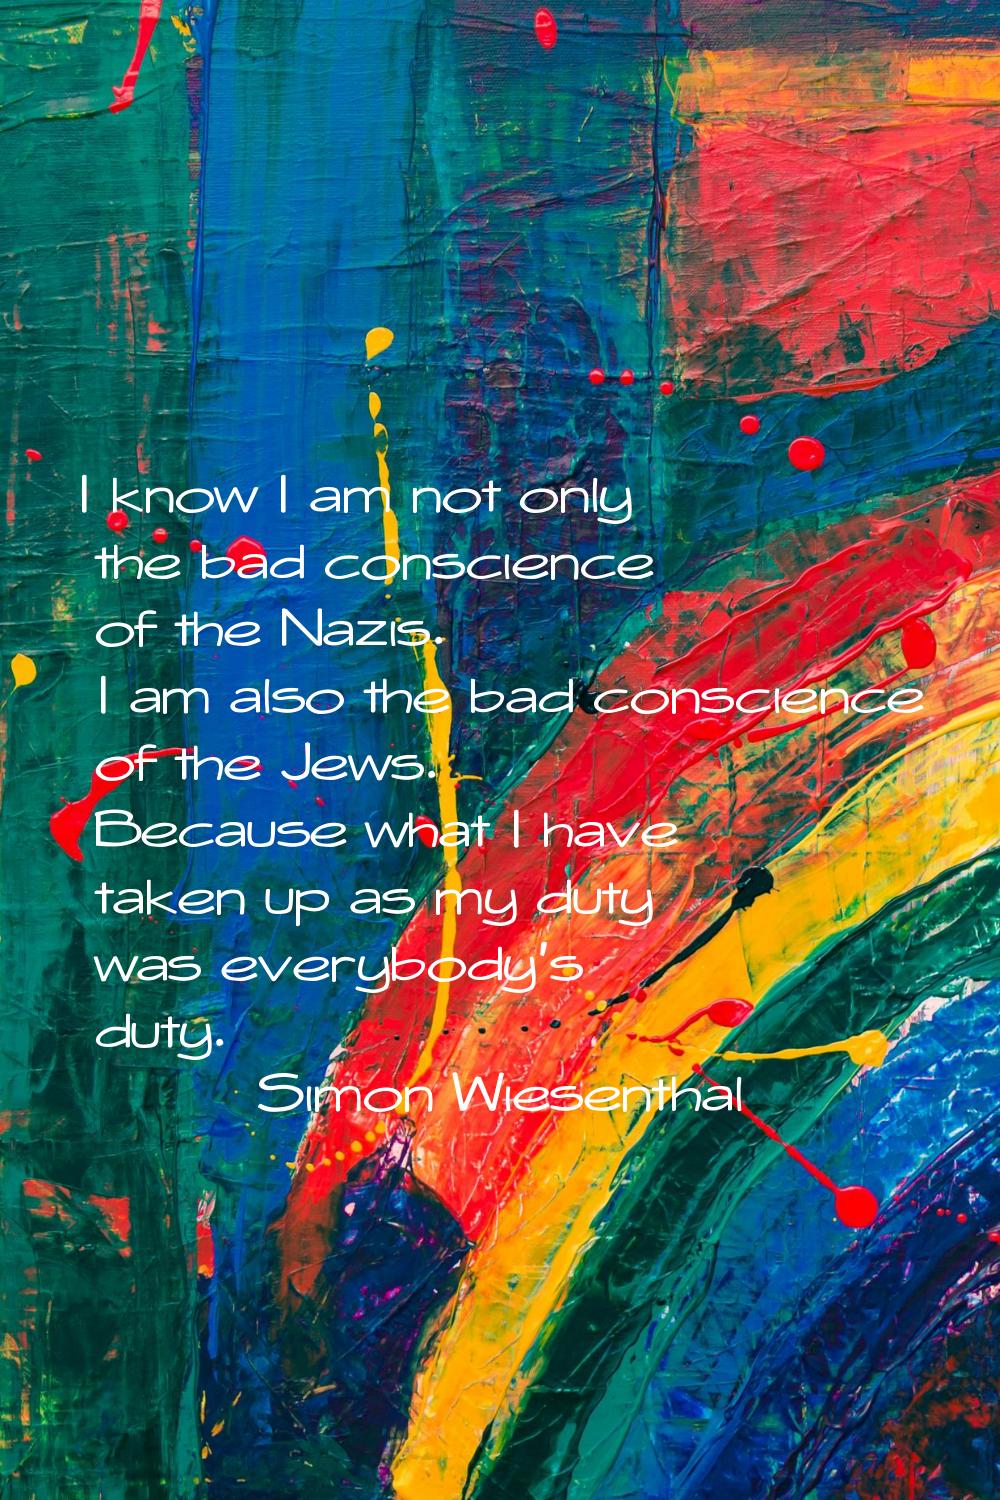 I know I am not only the bad conscience of the Nazis. I am also the bad conscience of the Jews. Bec